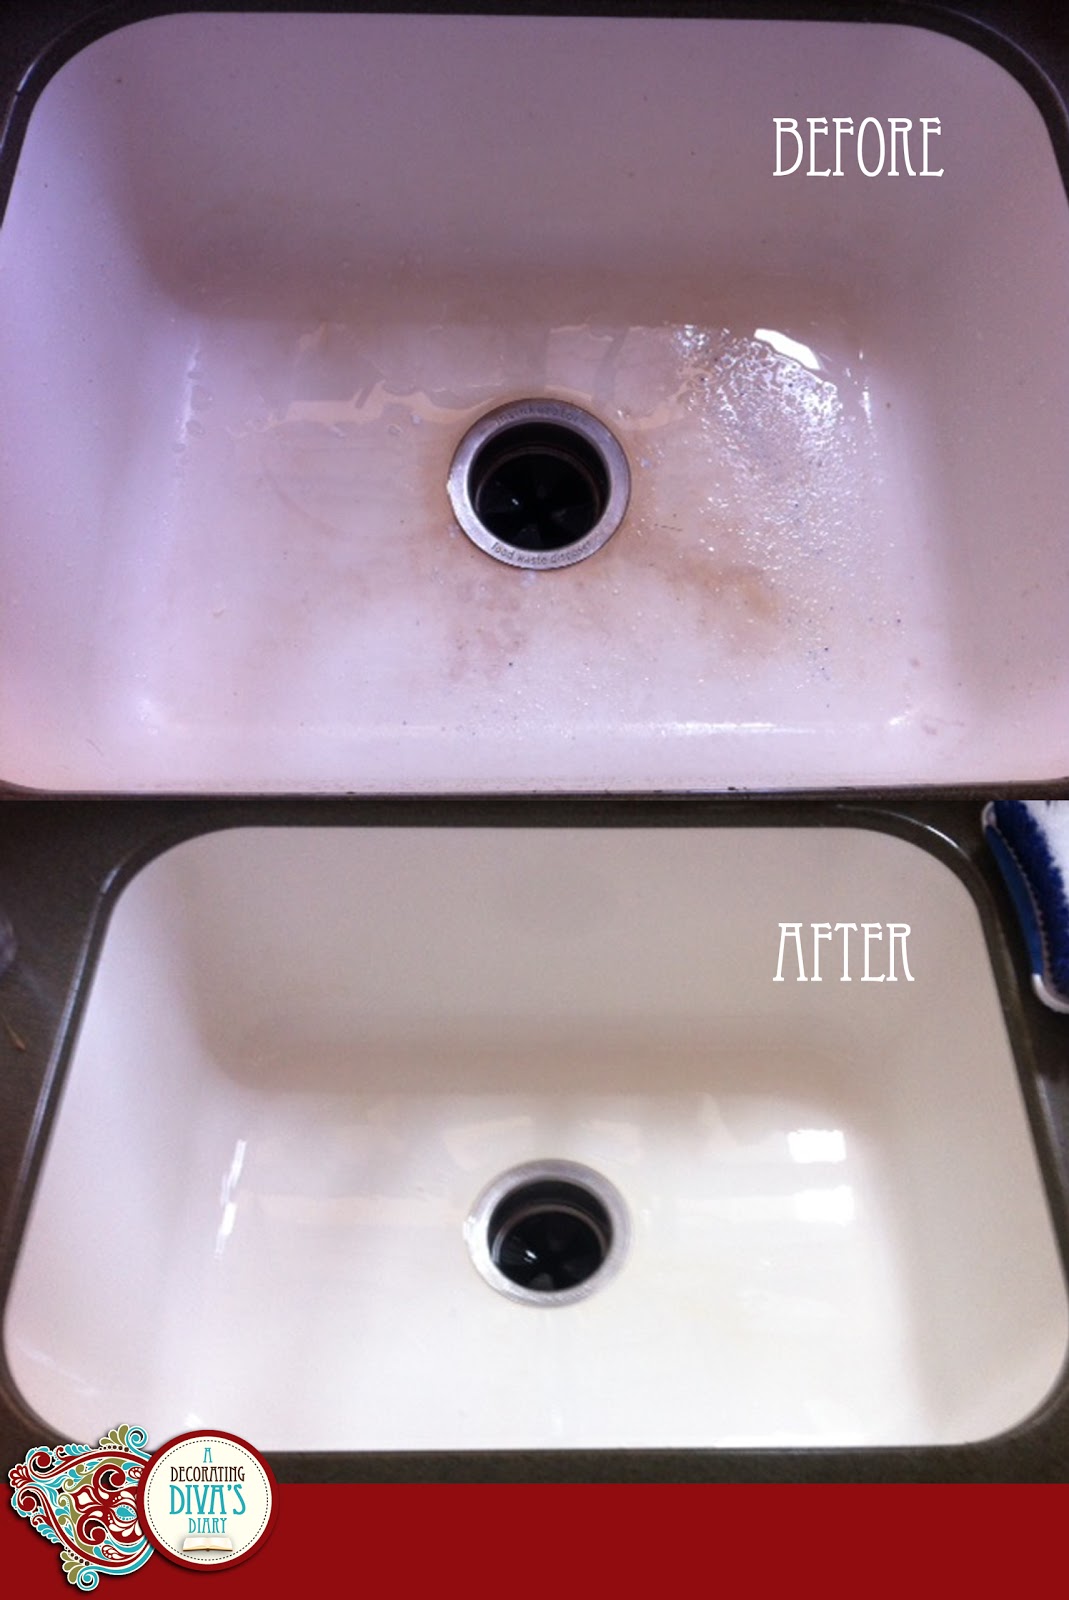 A Decorating Diva's Diary: Dear Diary...My Embarrassing Kitchen Sink!